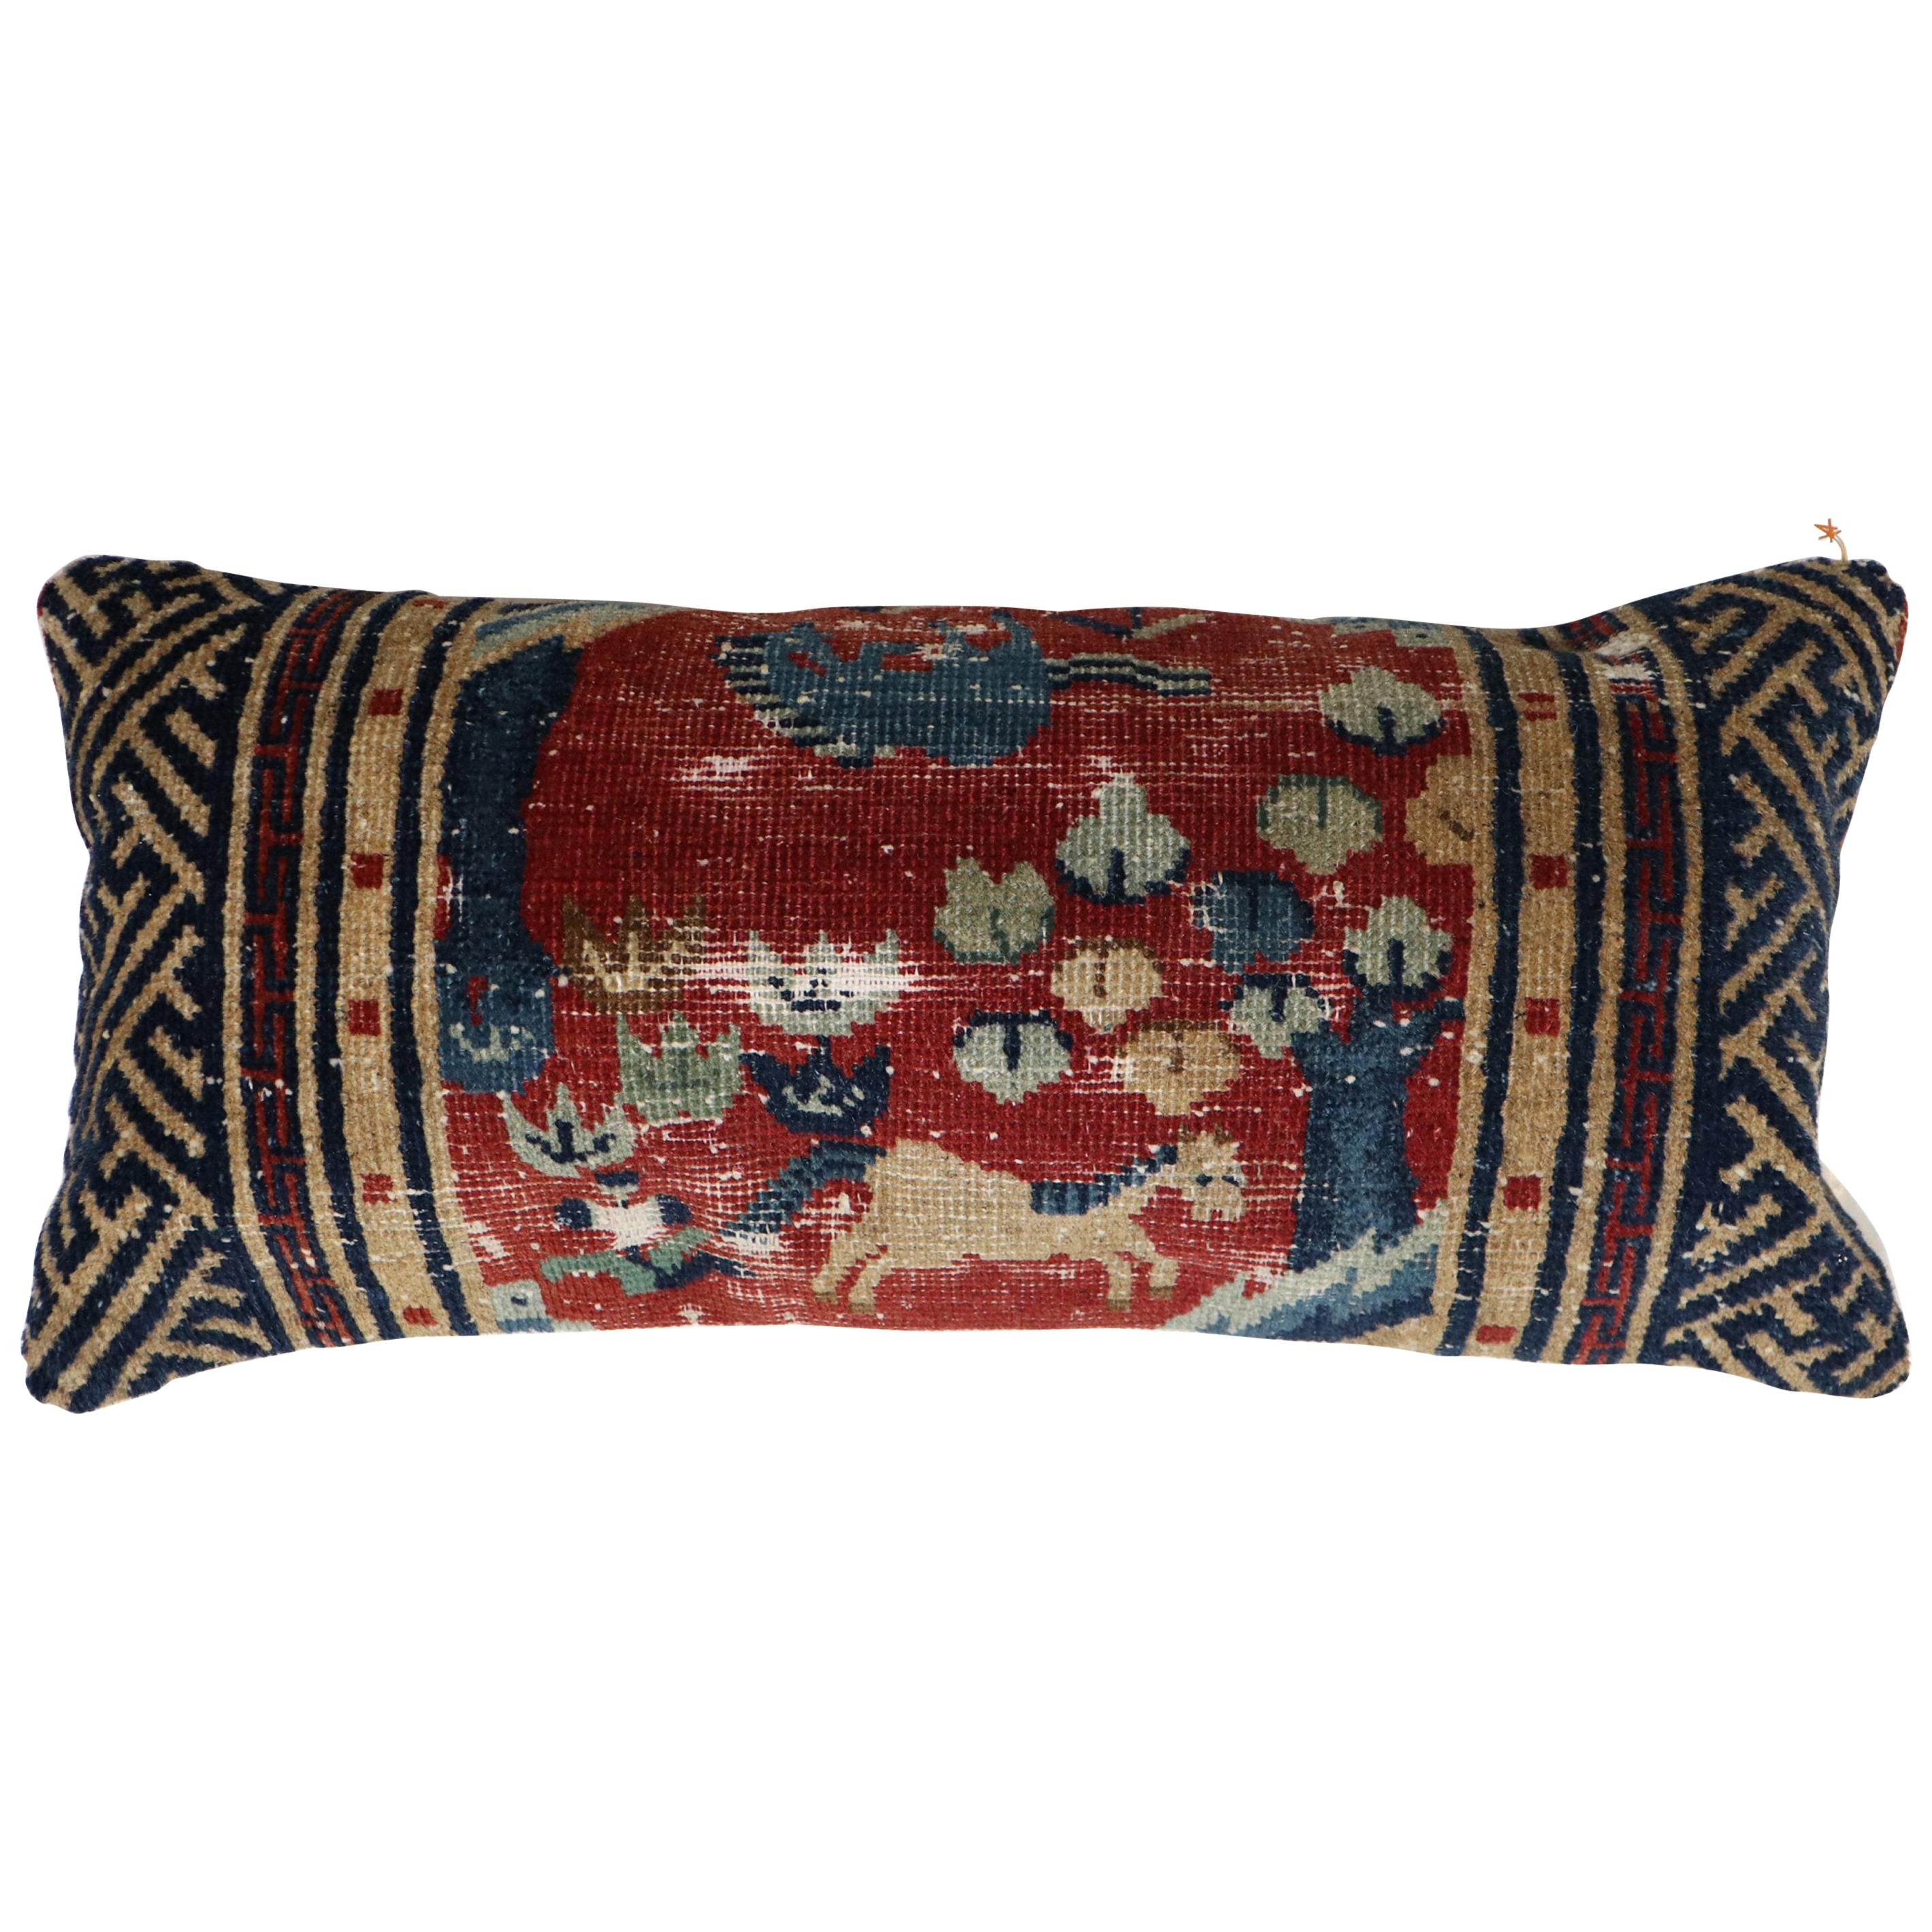 Bolster size pillow made from a mid-19th century animal motif Tibetan rug in red blue and camel. Backed in cotton, zipper closure provided too.

Measures: 12